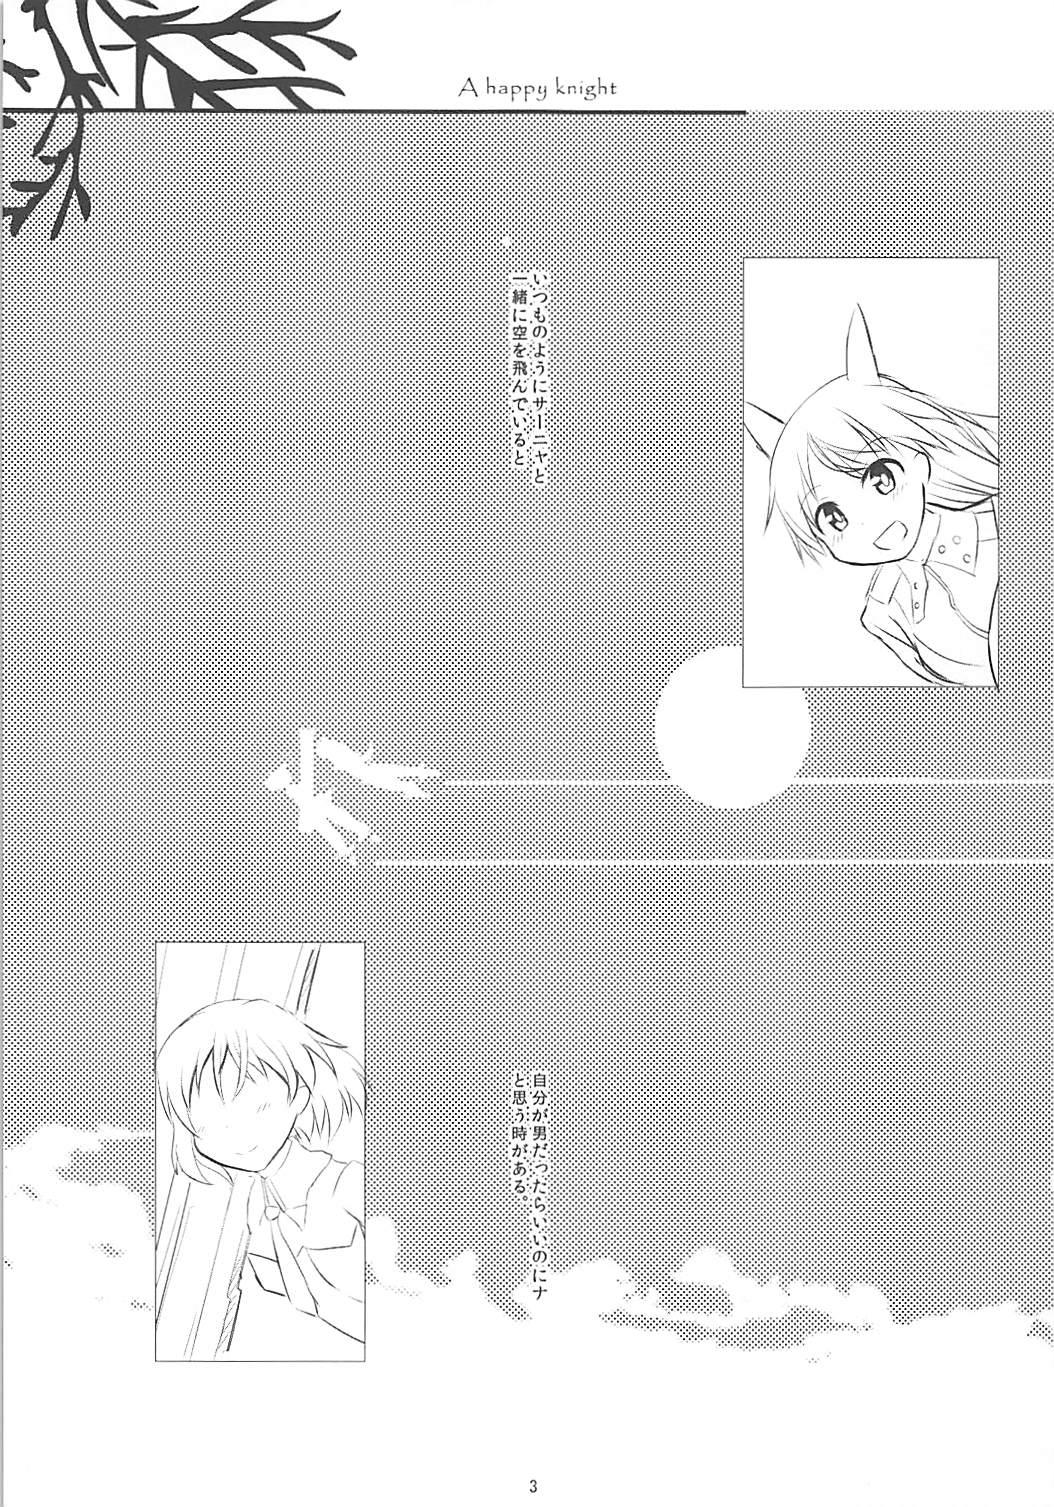 Pain A happy knight - Strike witches Rubdown - Page 2